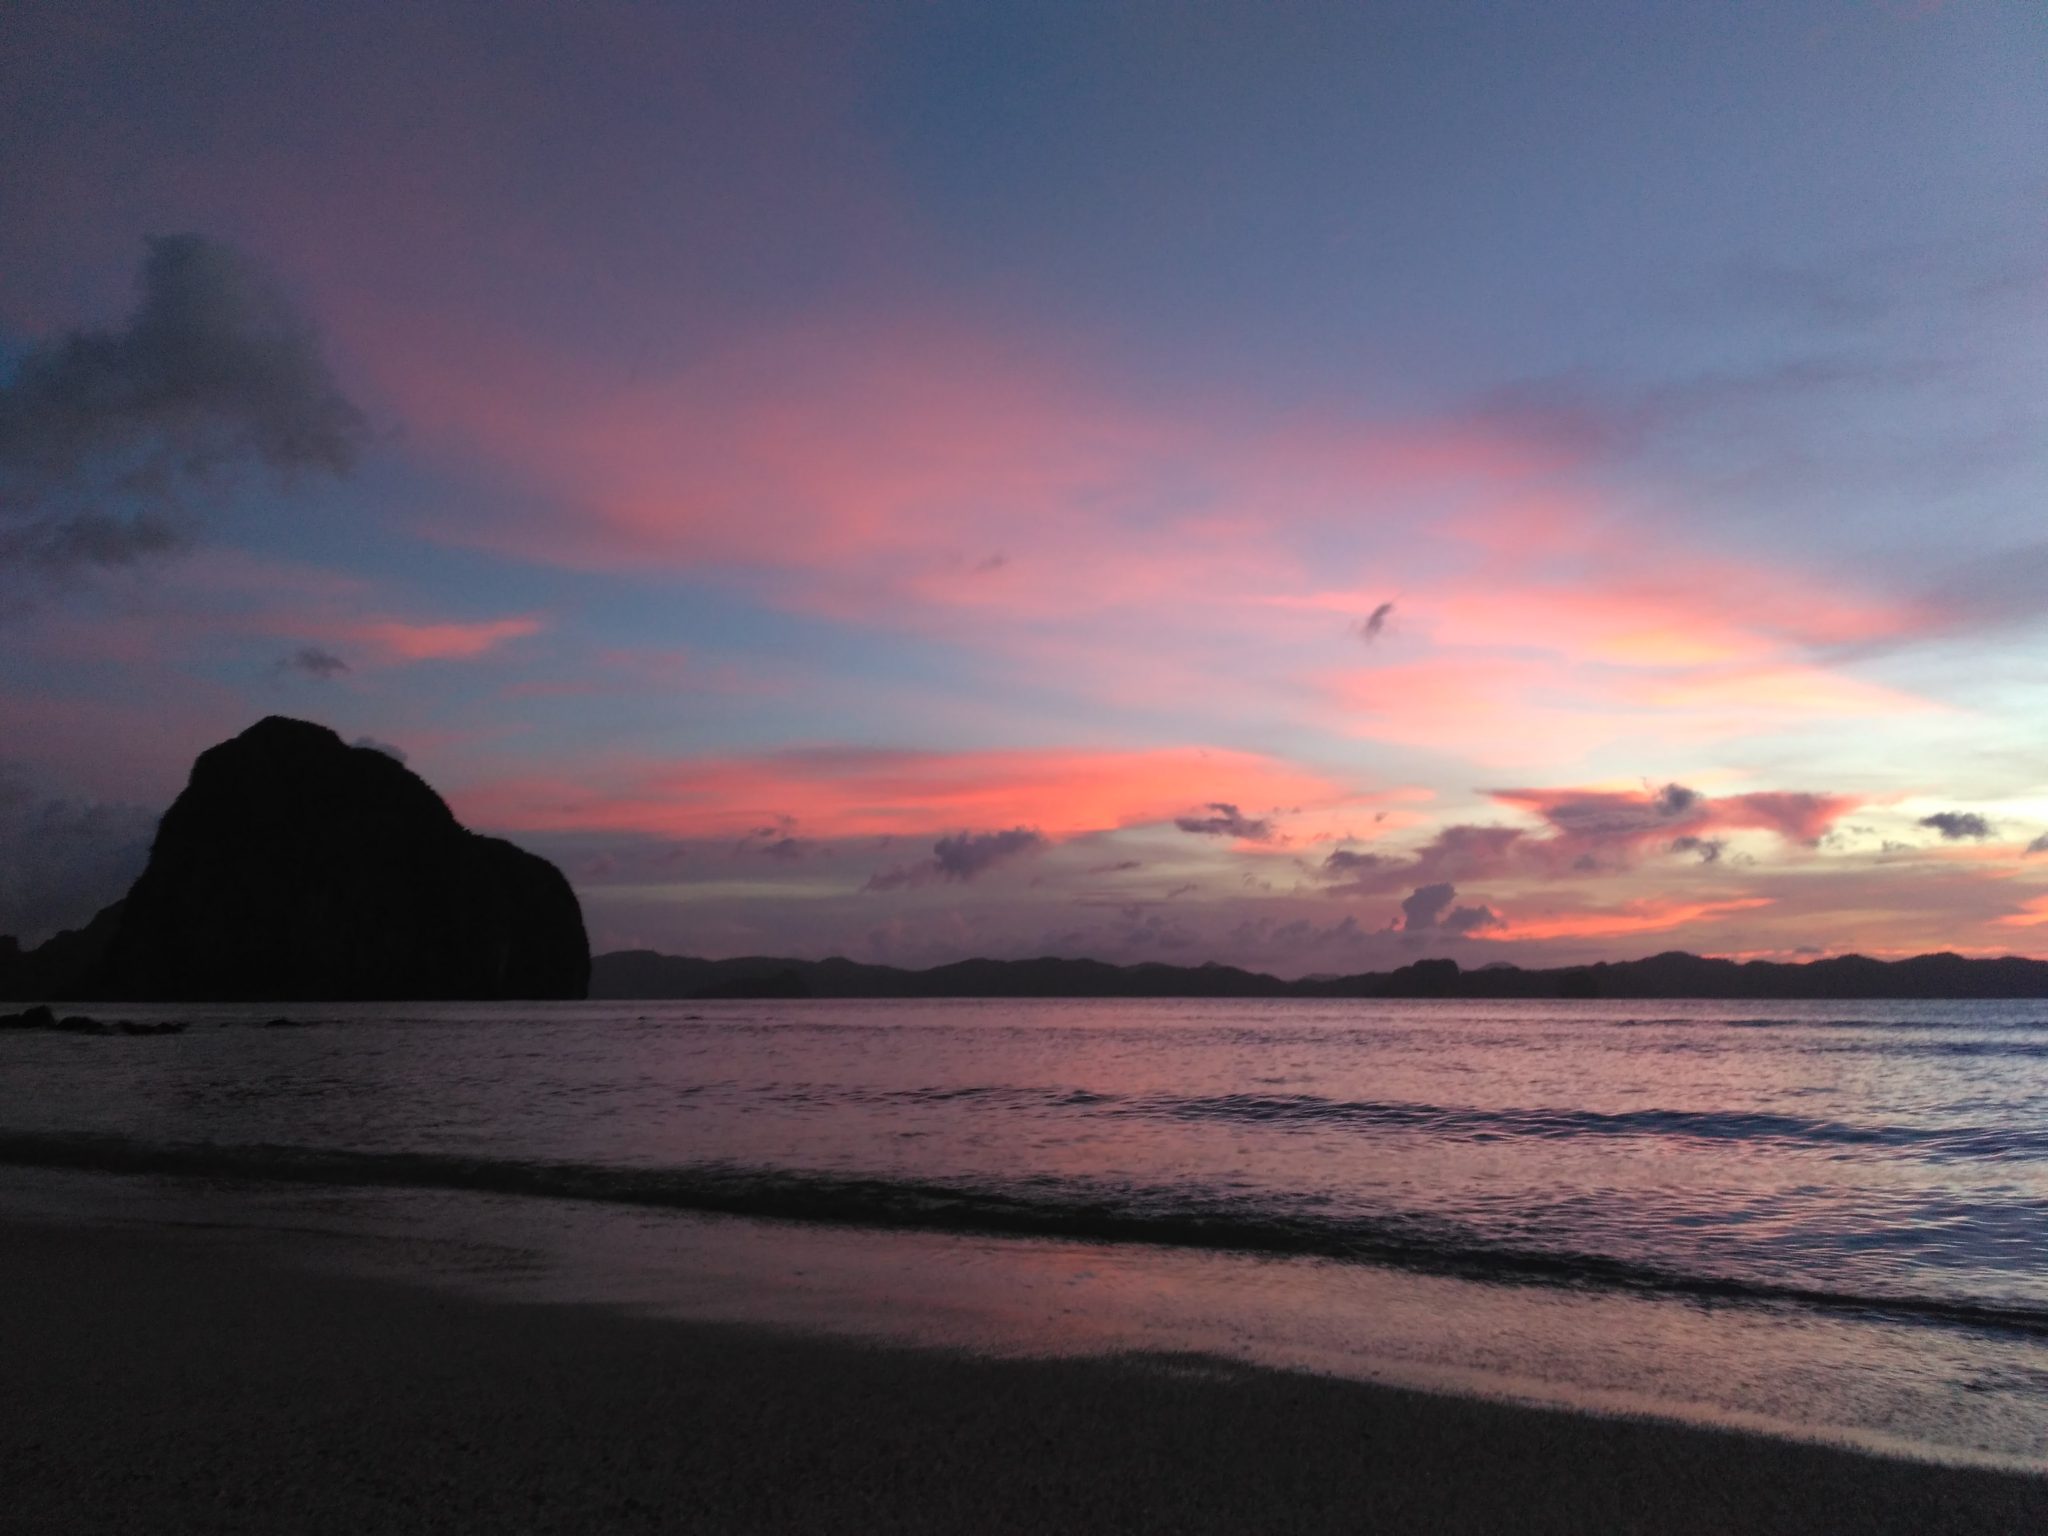 El Nido just in the nick of time